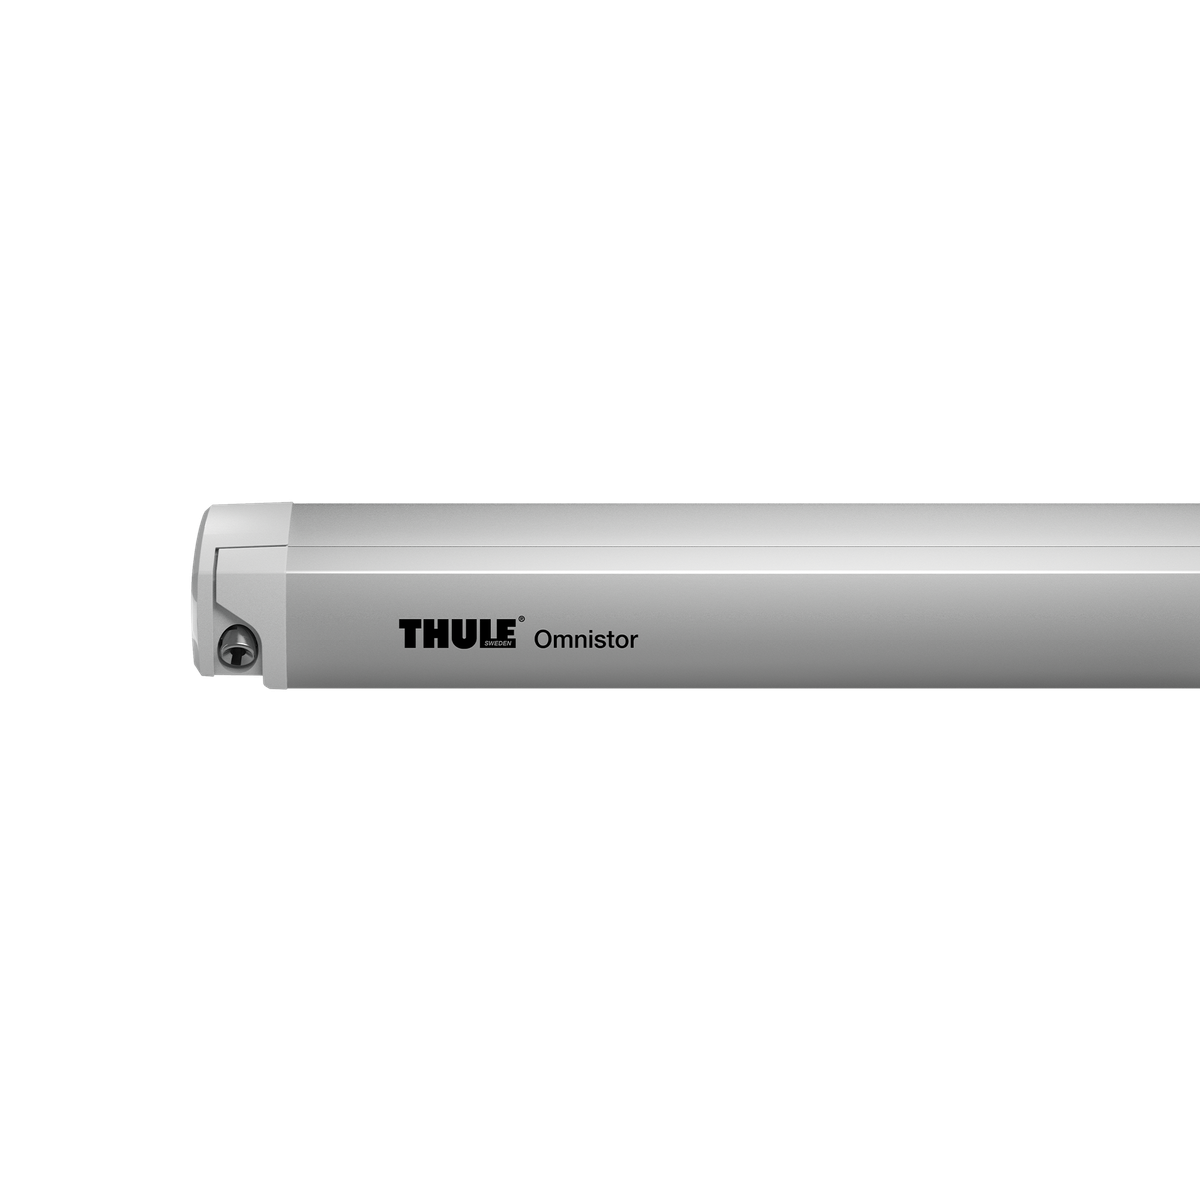 Thule Omnistor 9200 roof awning 6.00x3.00m anodised gray